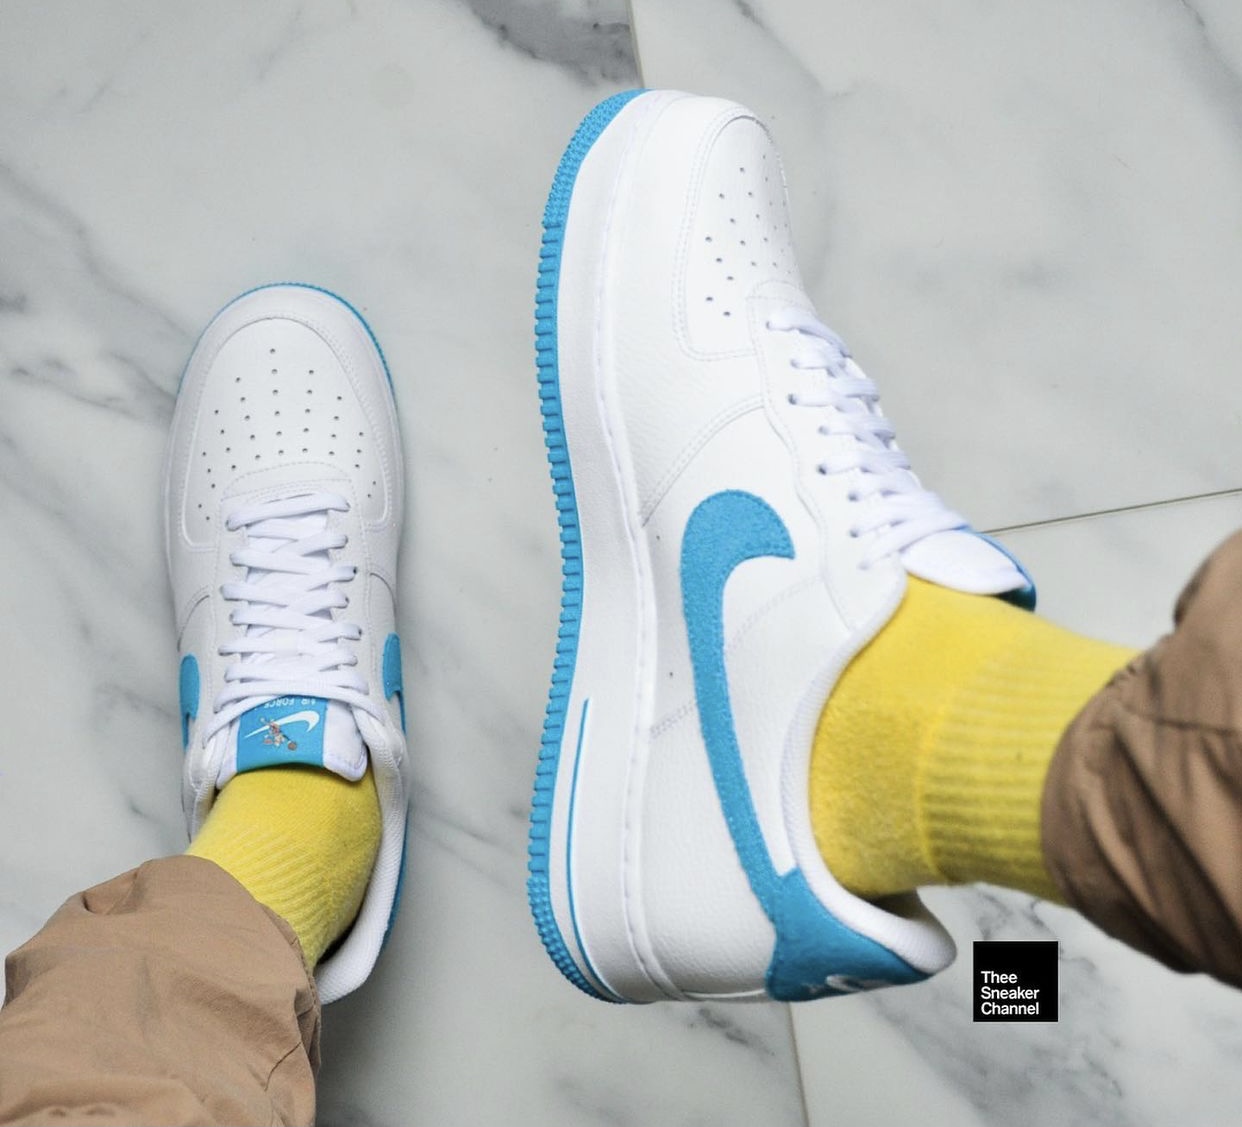 Space Jam Nike Air Force 1 Low Hare Release Date On Feet 3